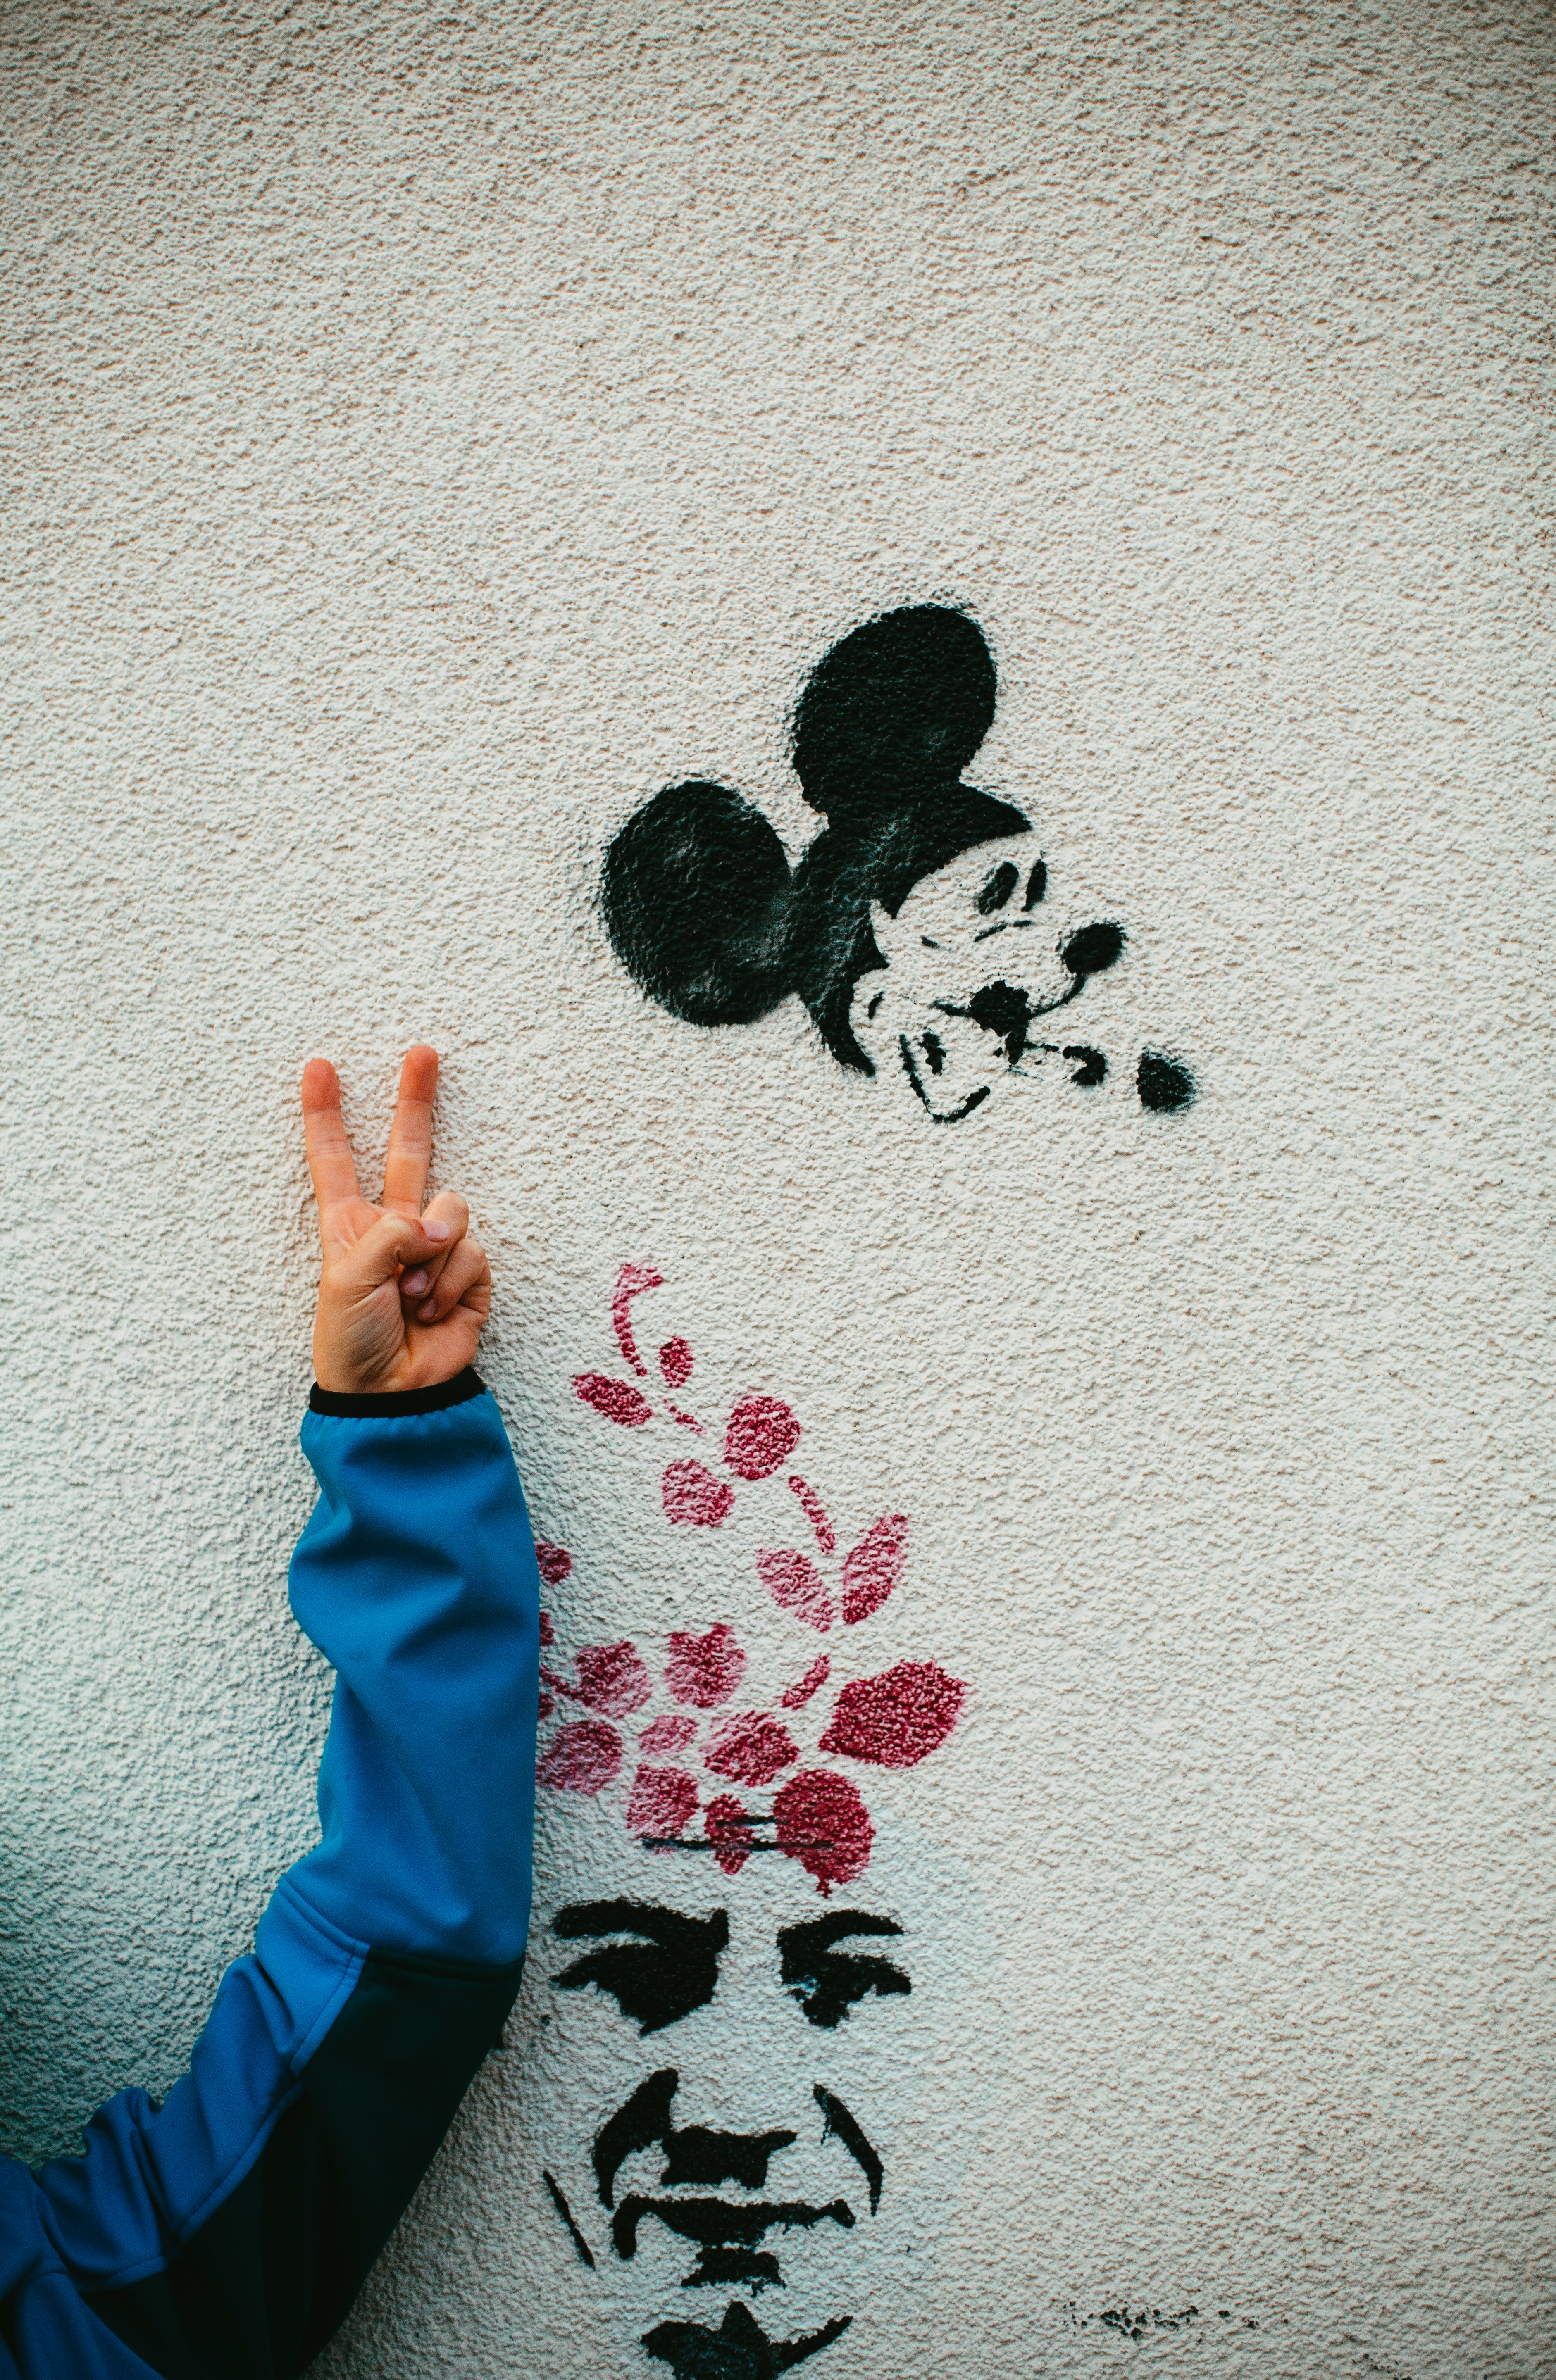 Mickey Mouse and man's face painted on the wall